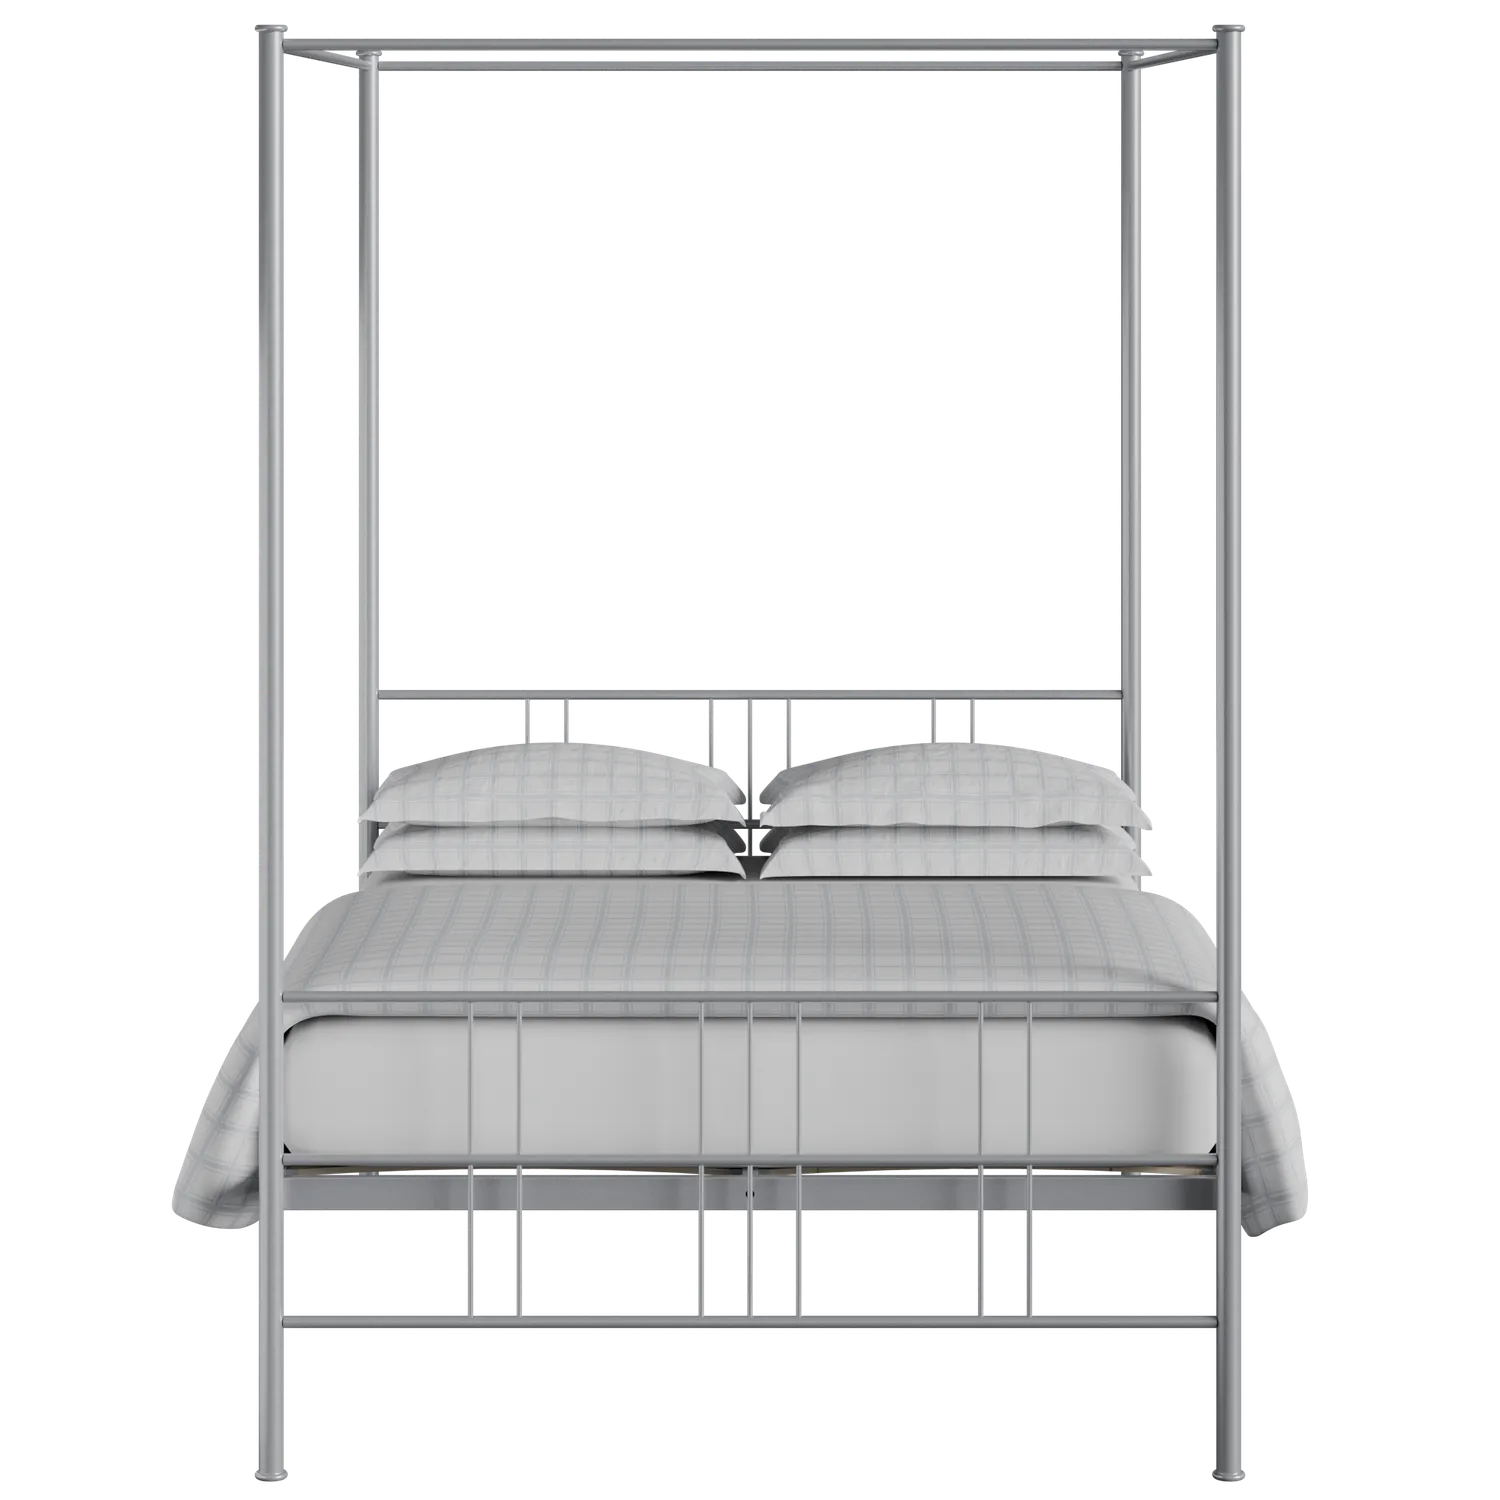 Toulon iron/metal bed in silver